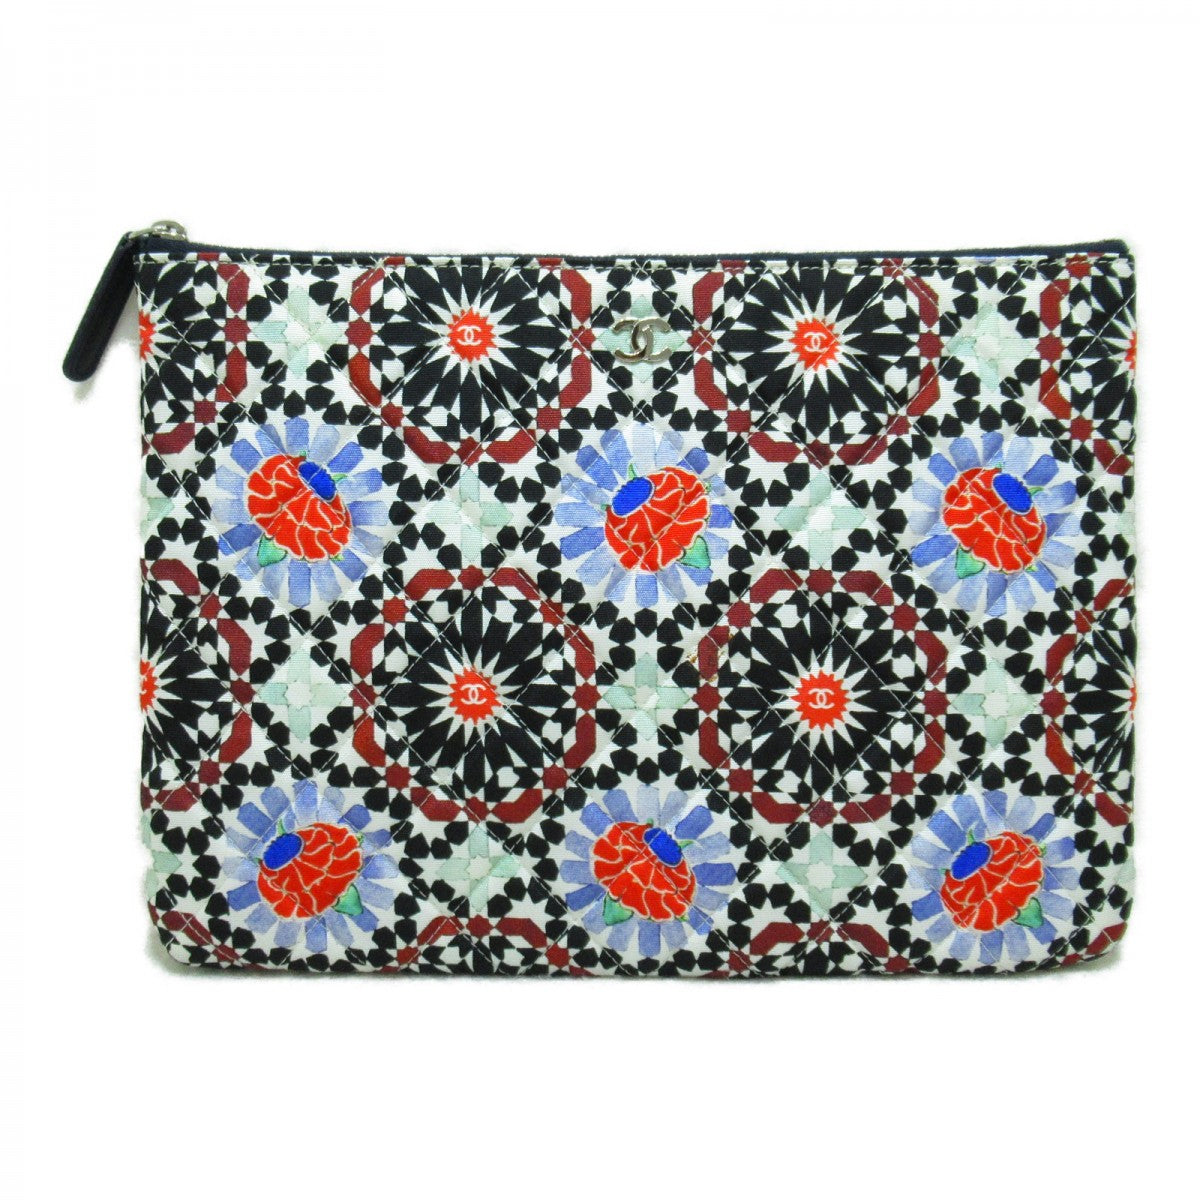 Quilted Nylon Clutch Bag